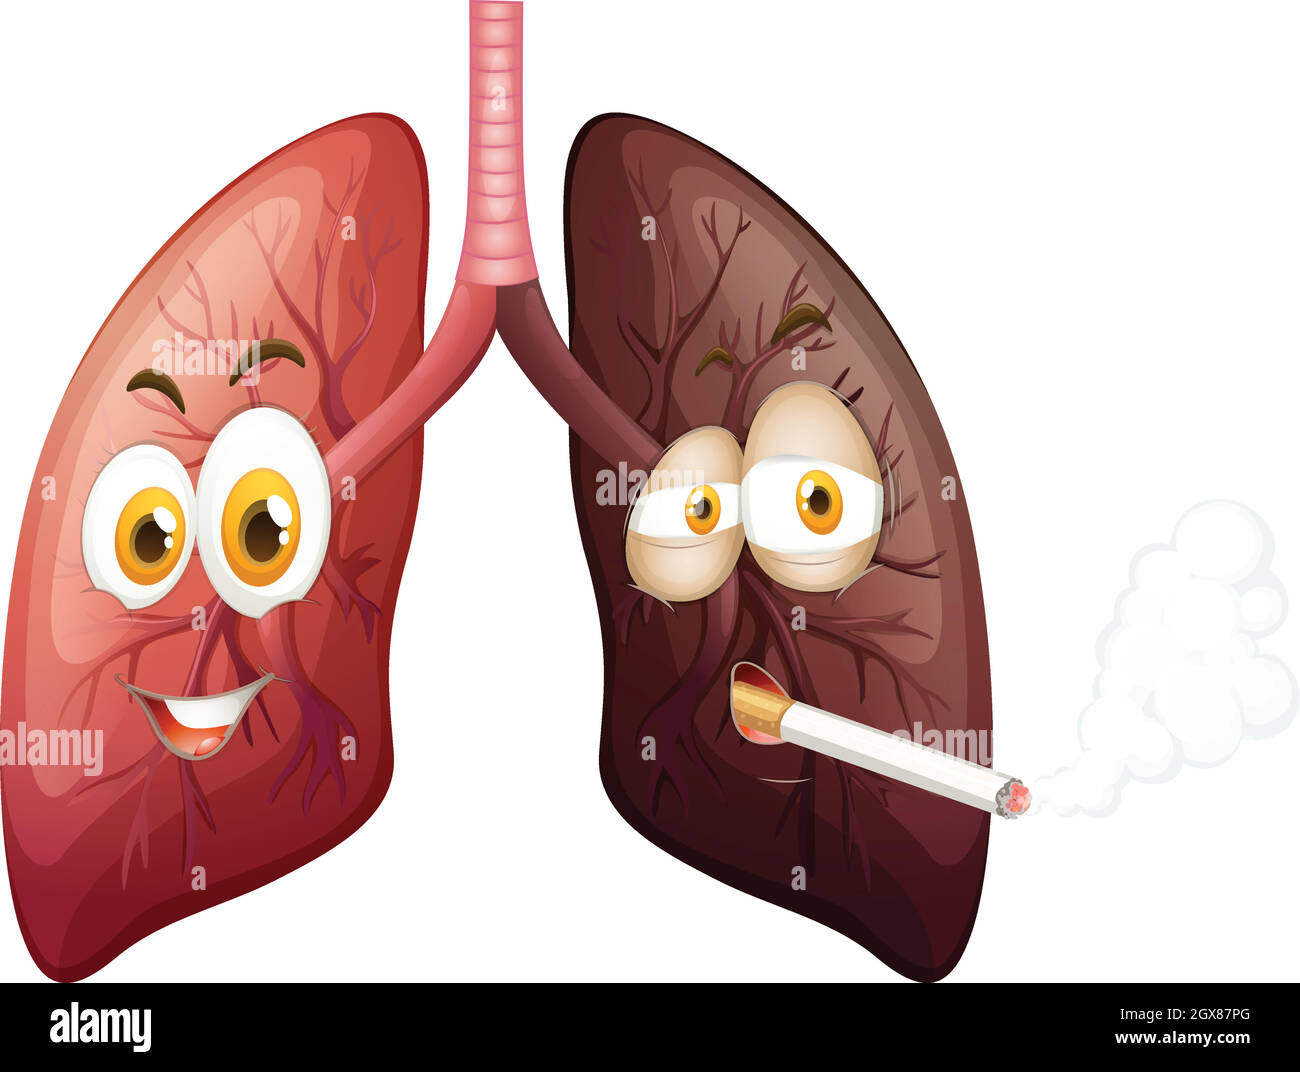 Happy lung and sad lung illustration Stock Vector